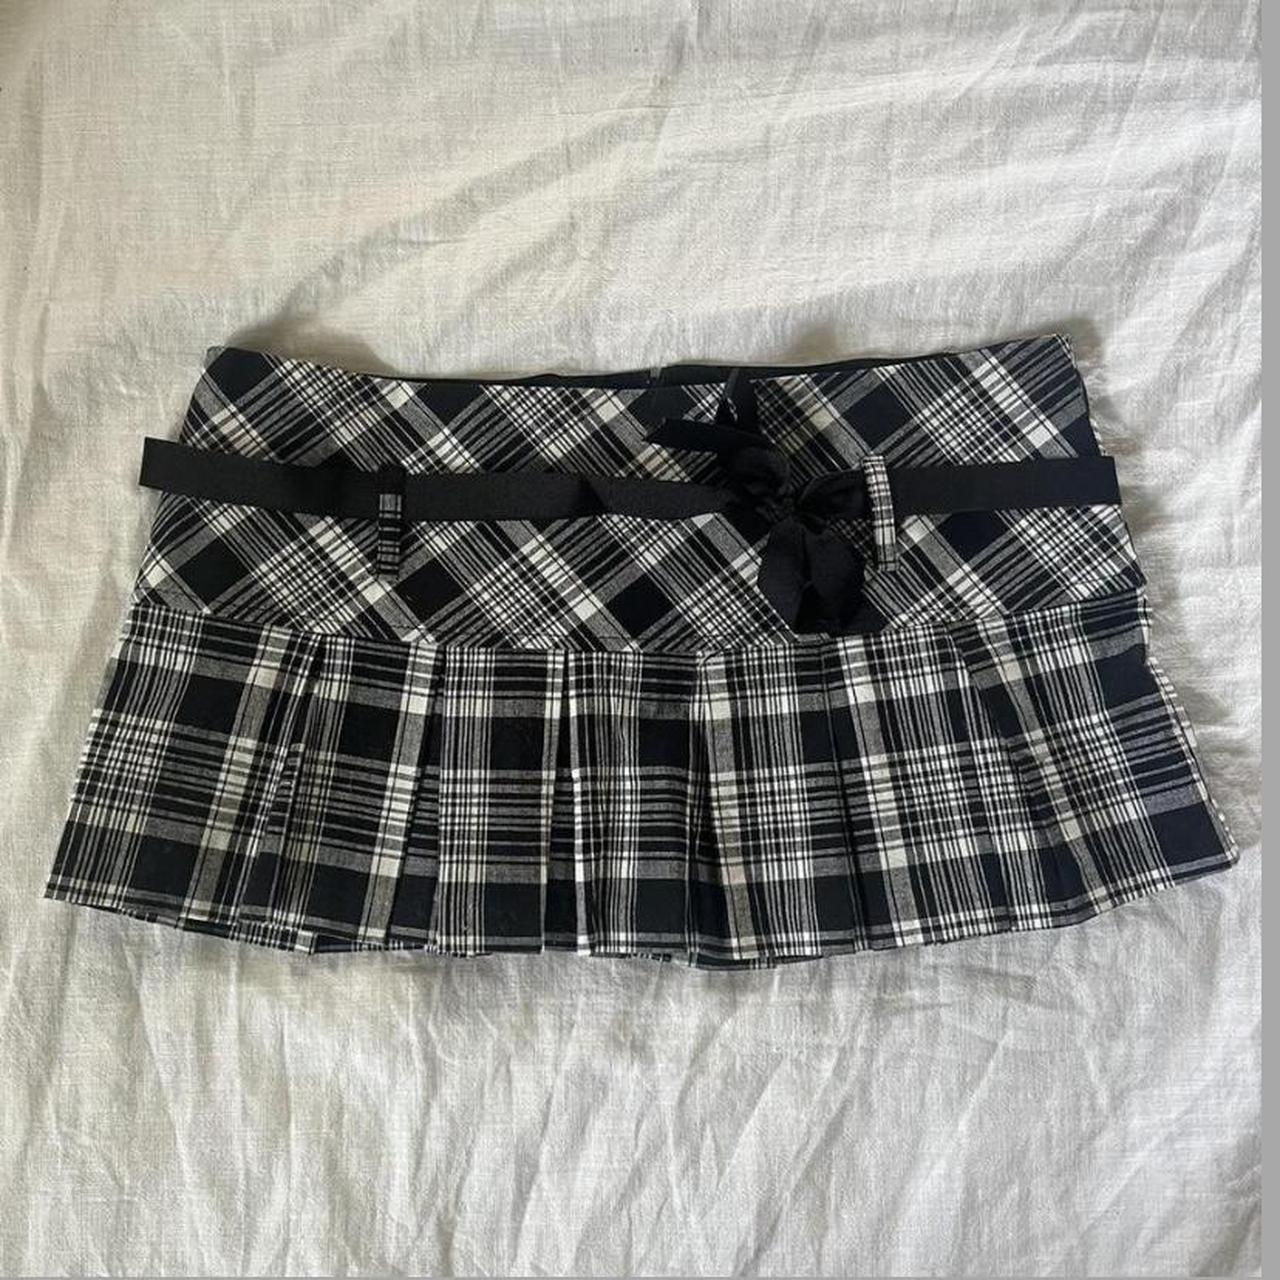 Plaid pleated mini skirt Message for any questions... - Depop